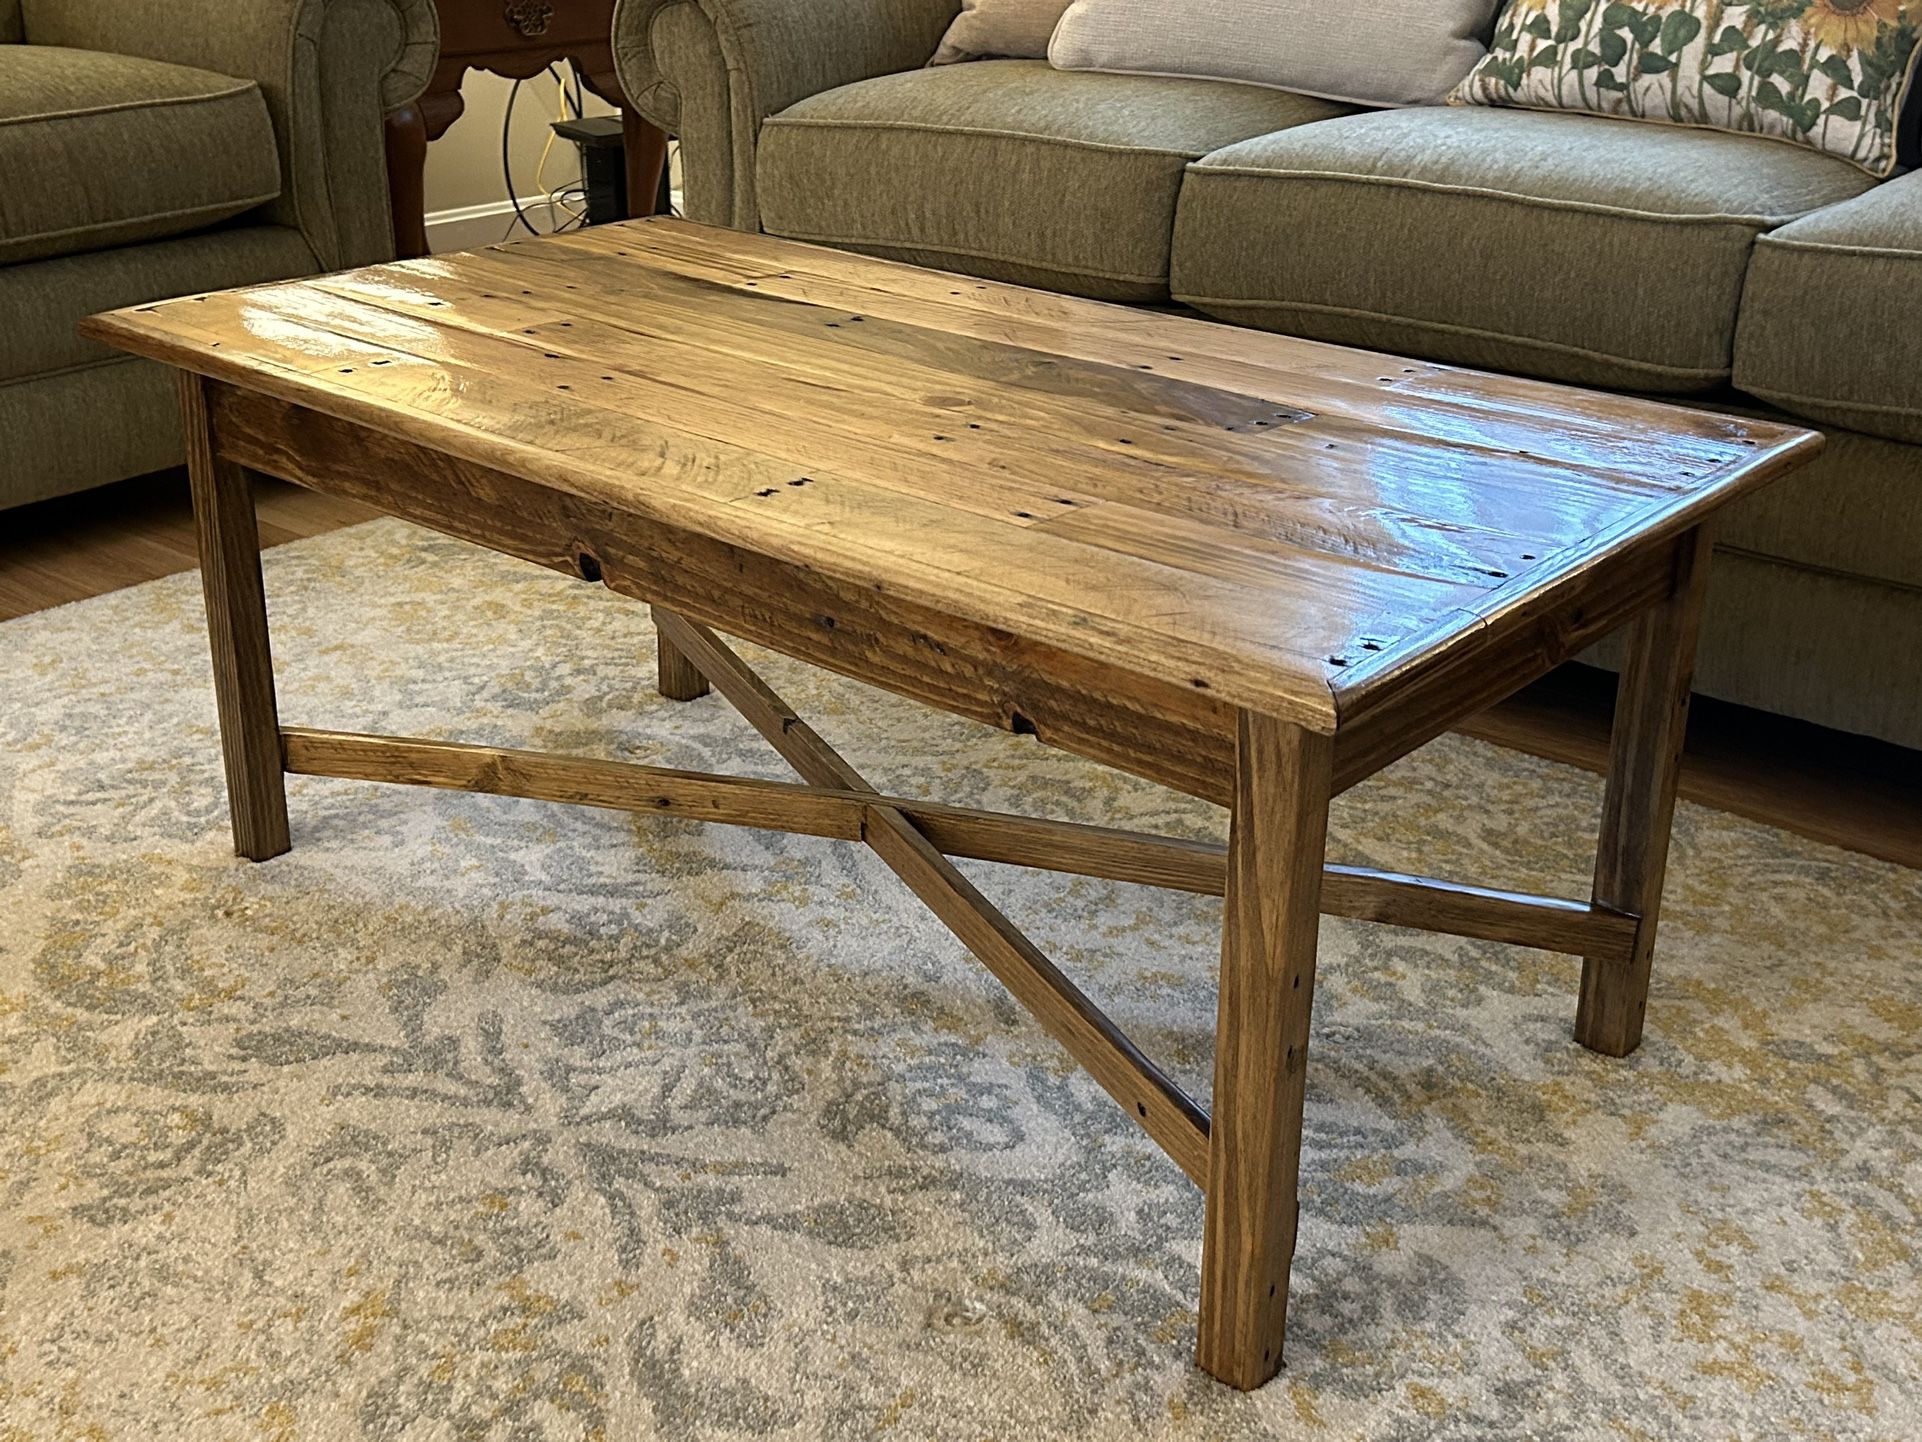 Repurposed Pallet Wood Coffee Table and End Table Set